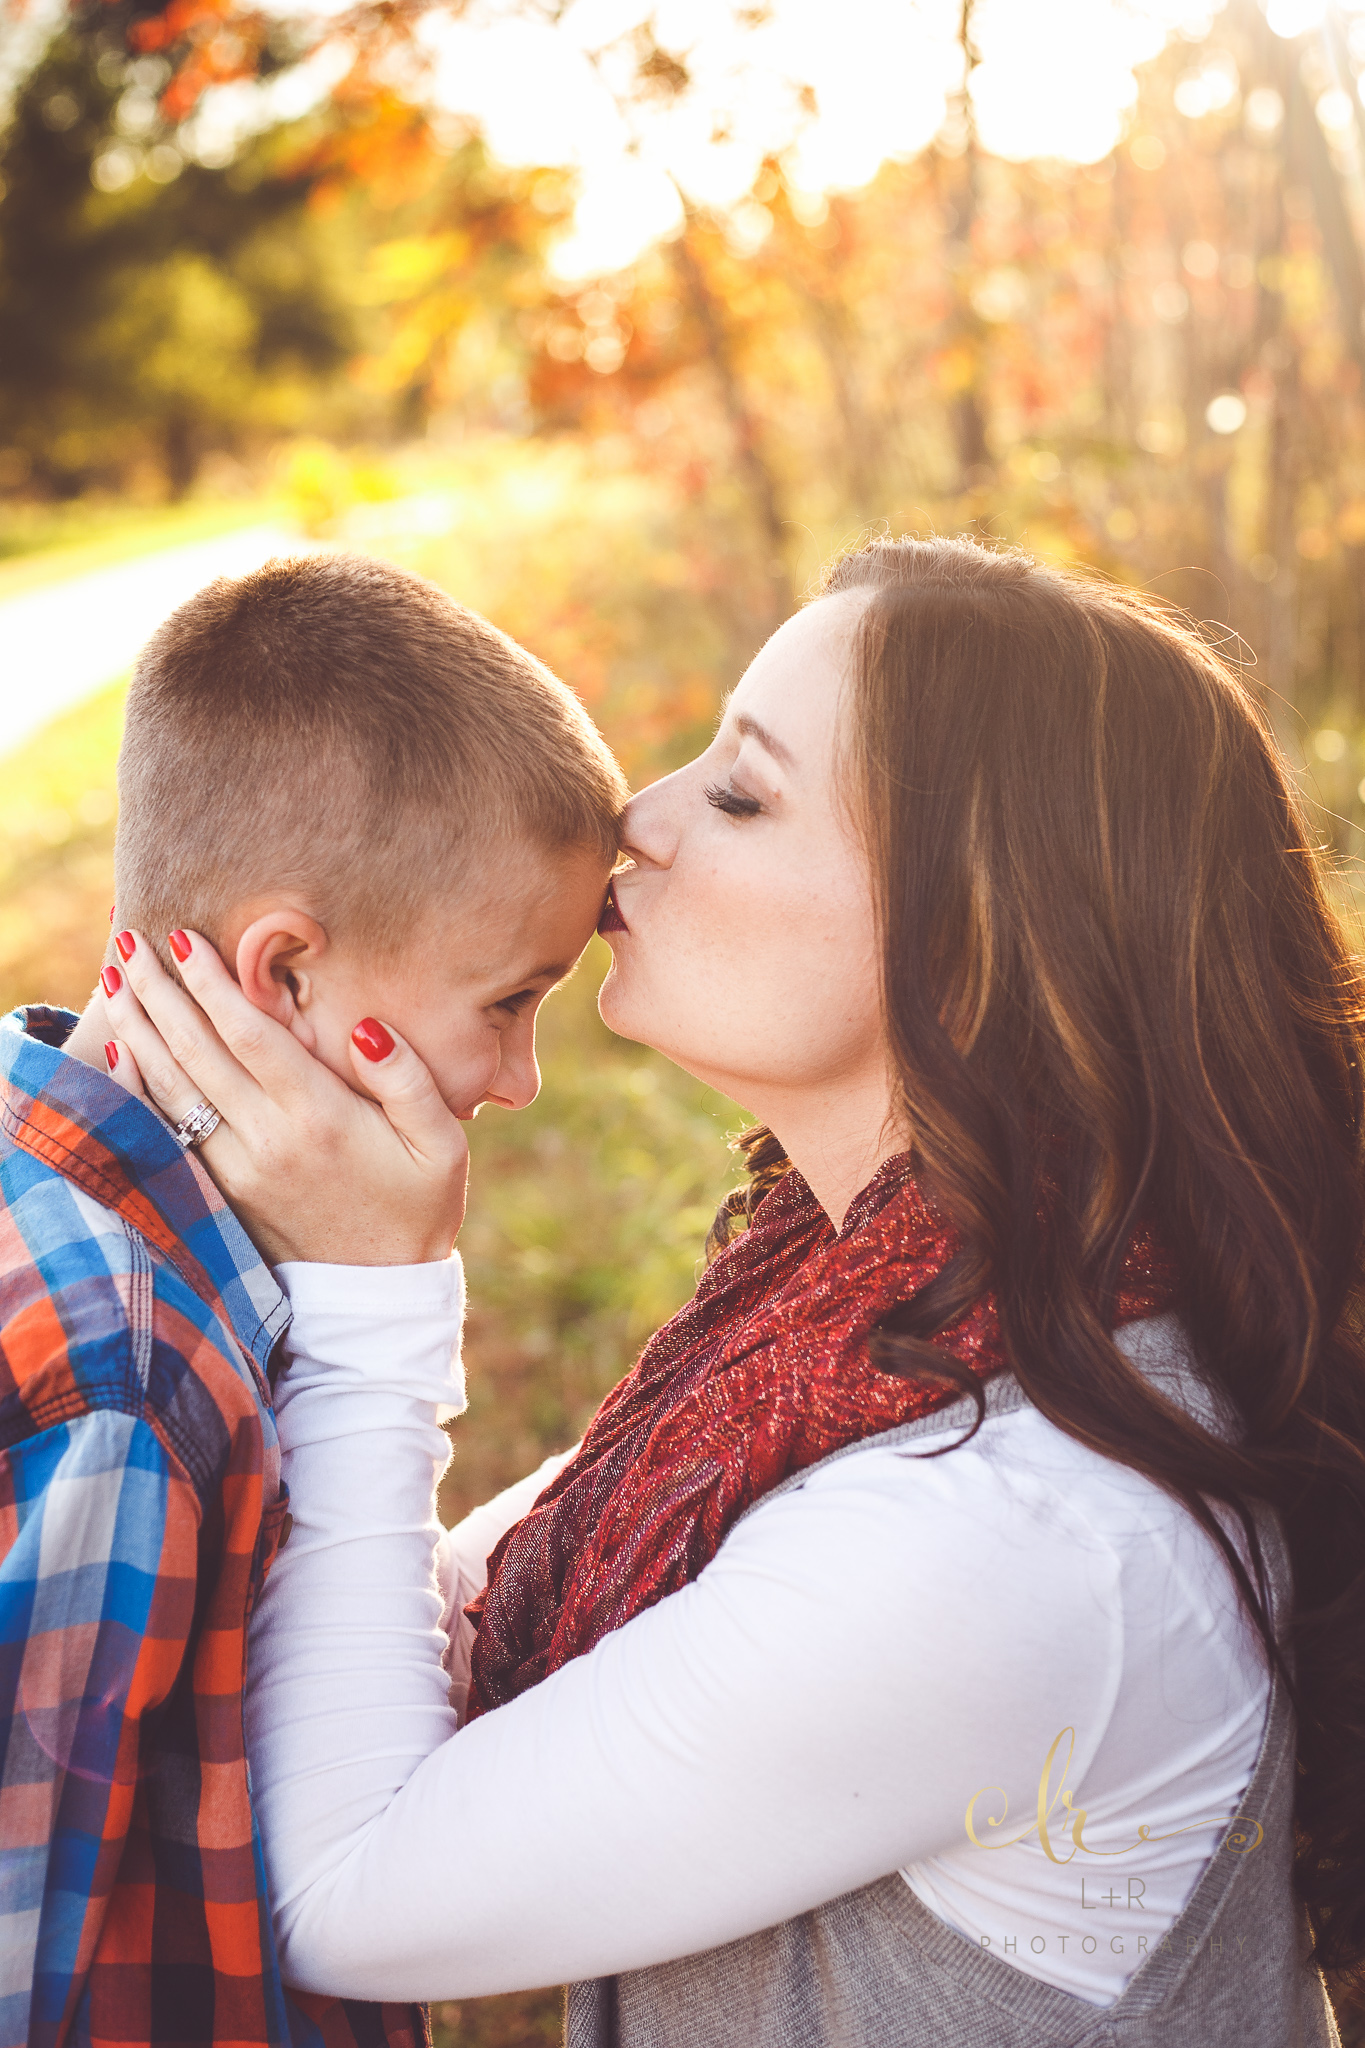 A young mother wearing a striking red scarp tenderly kisses the forehead of her son in this family photograph by L&R Photography of Tulsa, OK